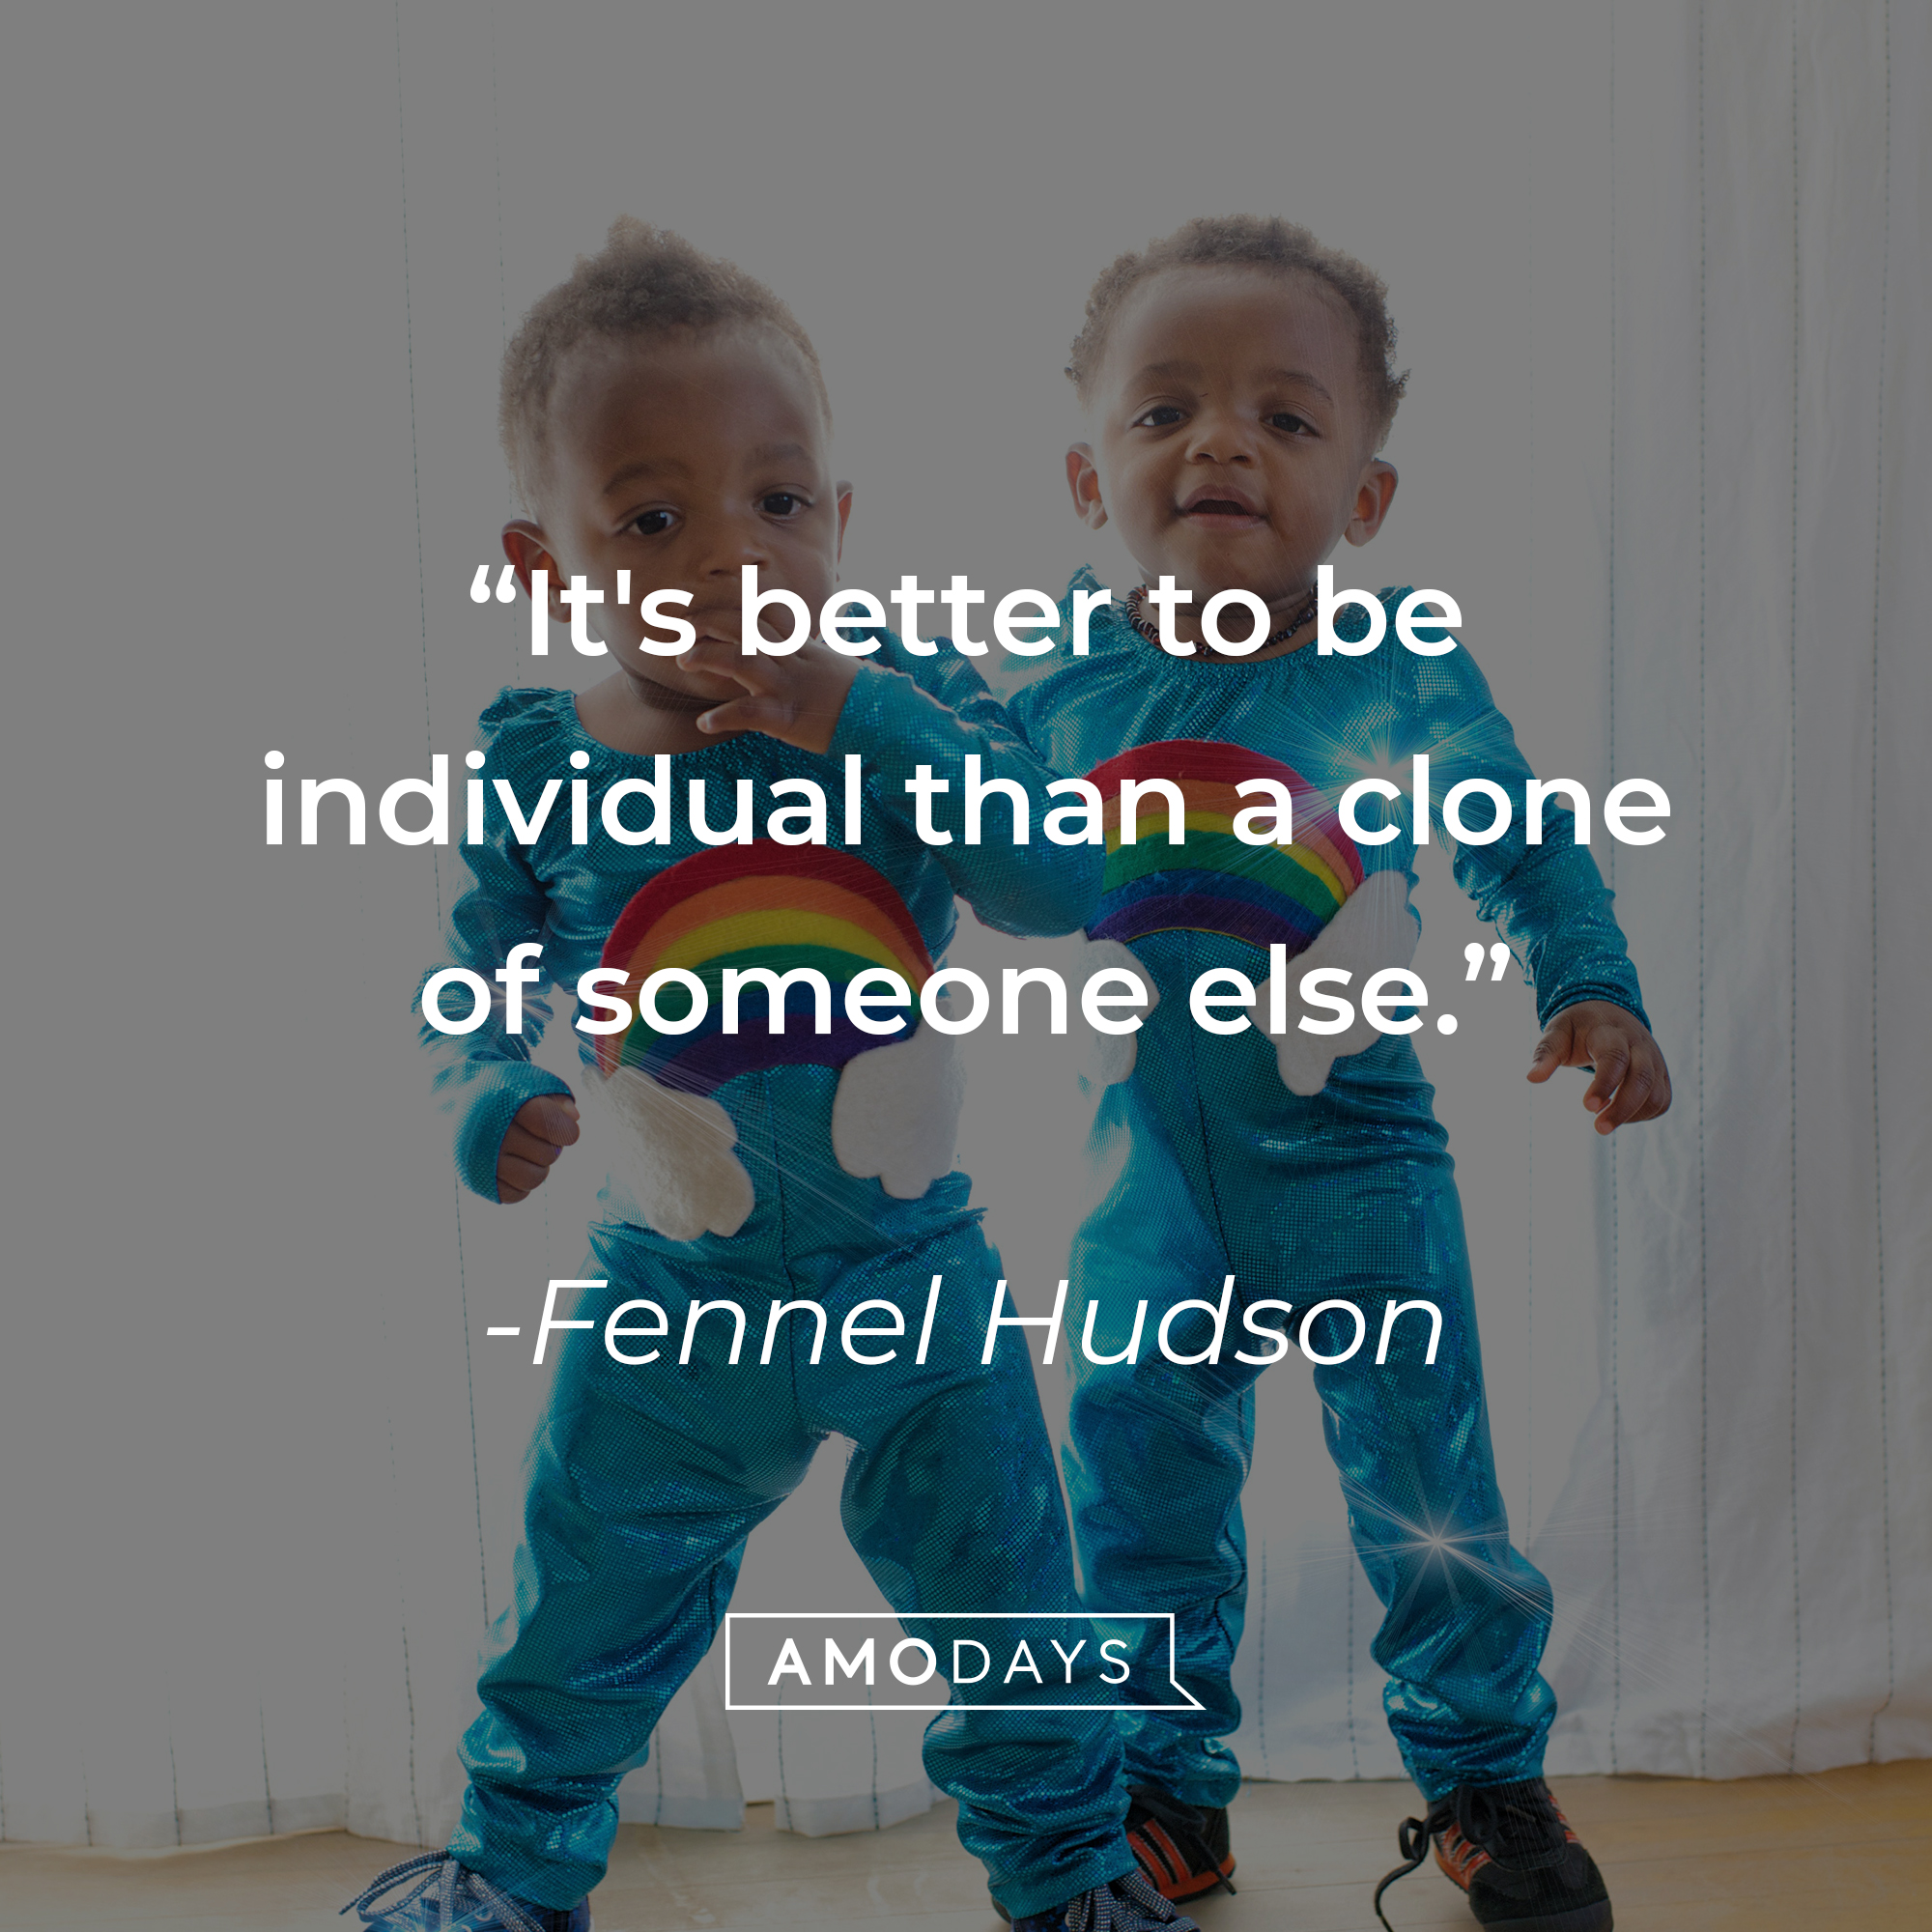 Fennel Hudson's quote, "It's better to be individual than a clone of someone else." | Image: Unsplash.com